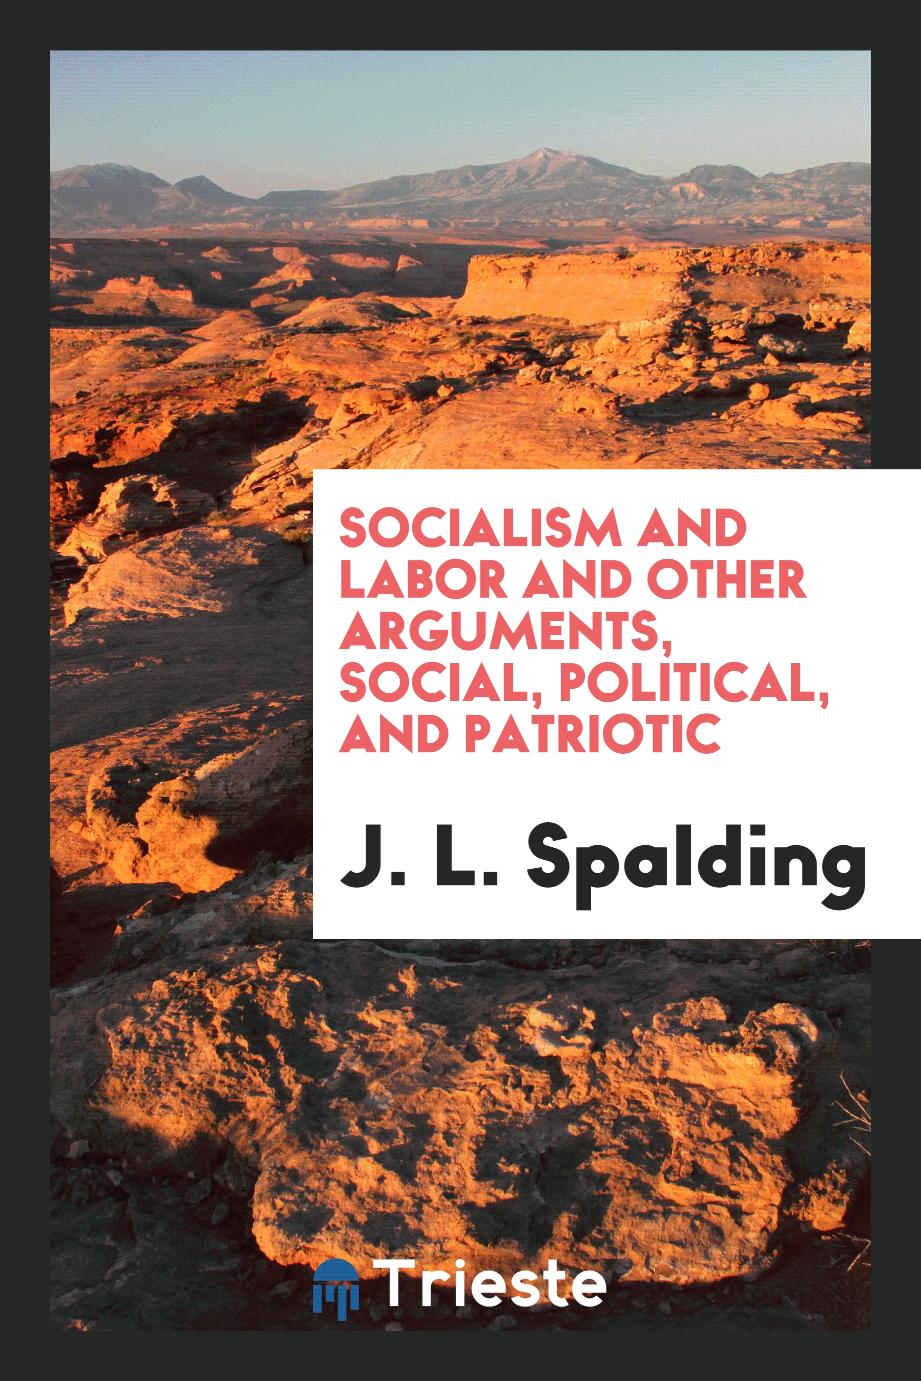 Socialism and labor and other arguments, social, political, and patriotic